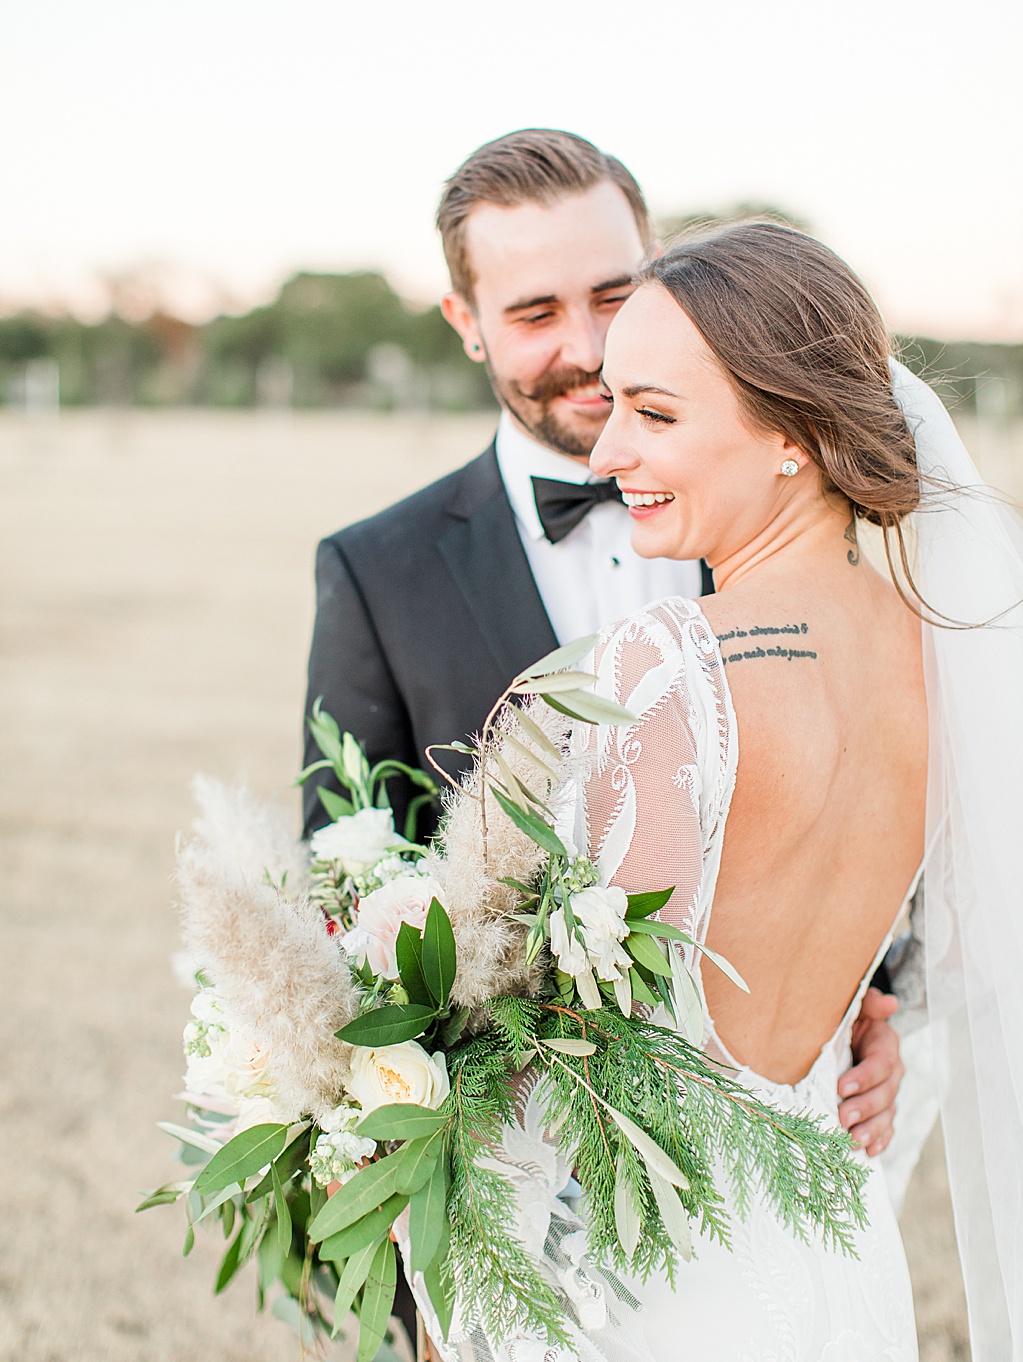 Hill Country Wedding at Turtle Creek Olive Grove wedding venue in Kerrville Texas by Wedding Photographer Allison Jeffers 0104